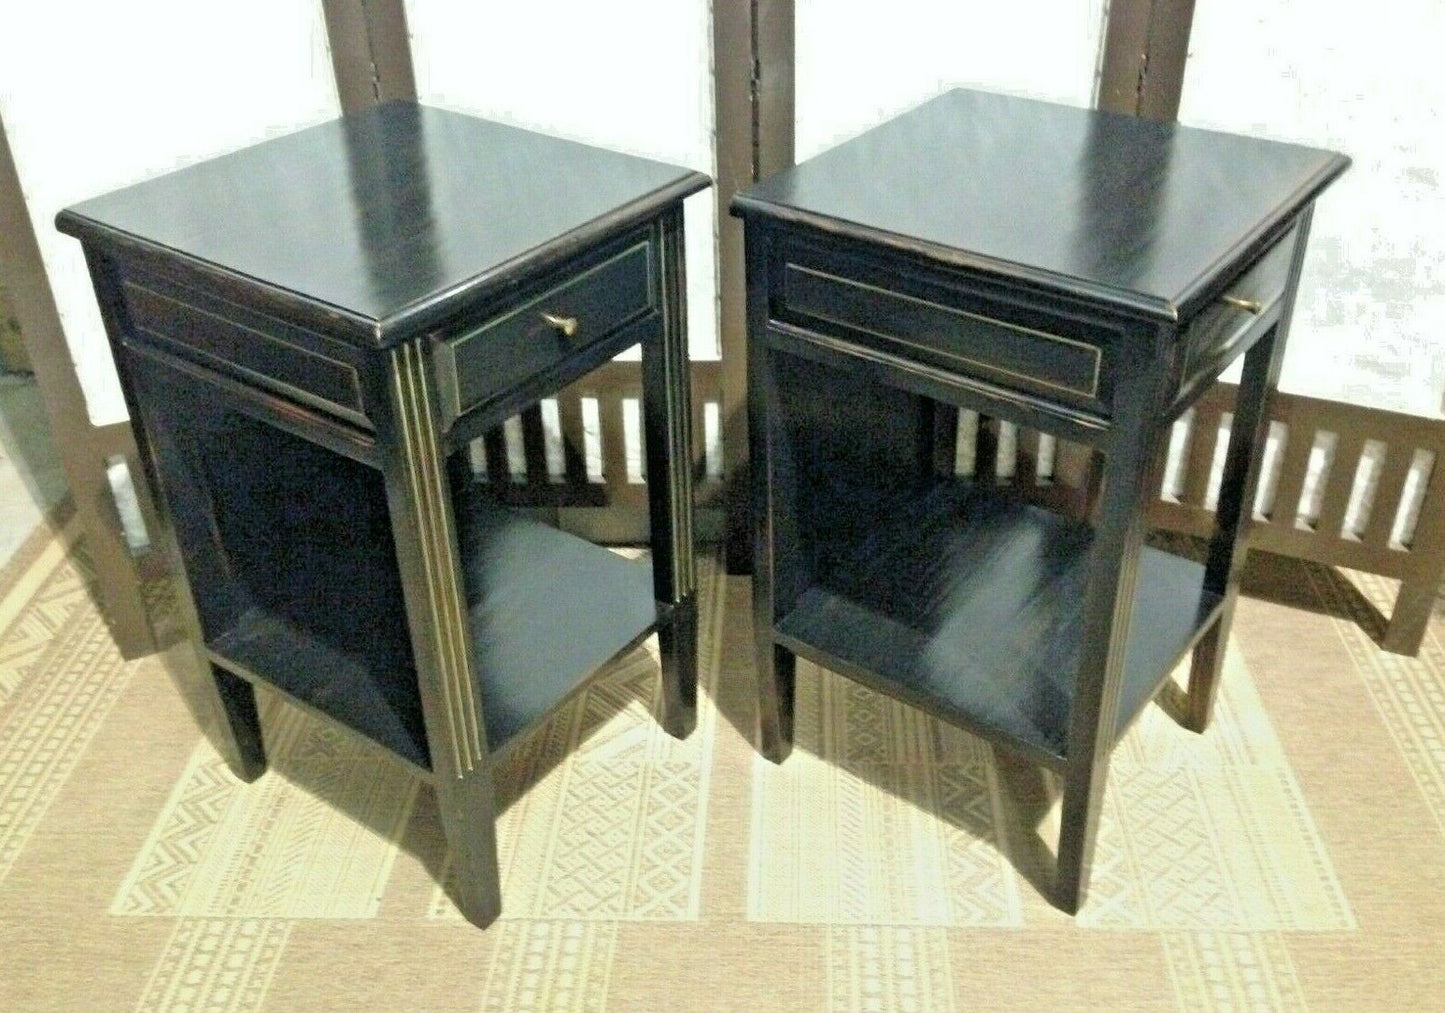 A Pair Of Vintage Empire Style Bedside Tables / Pair Of Lamp Tables